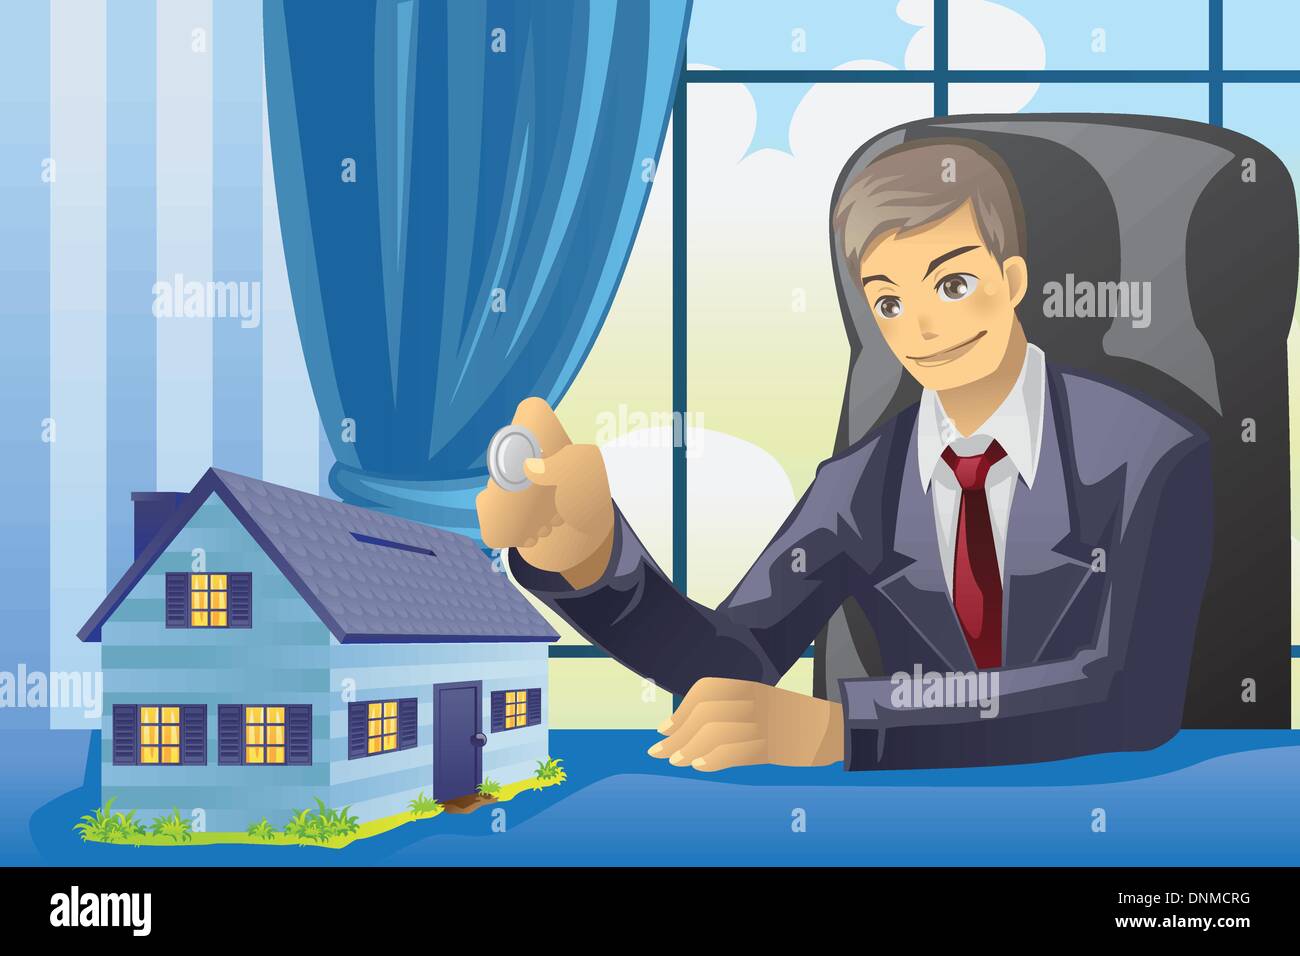 A vector illustration of a businesssman saving money into a house shaped piggy bank Stock Vector